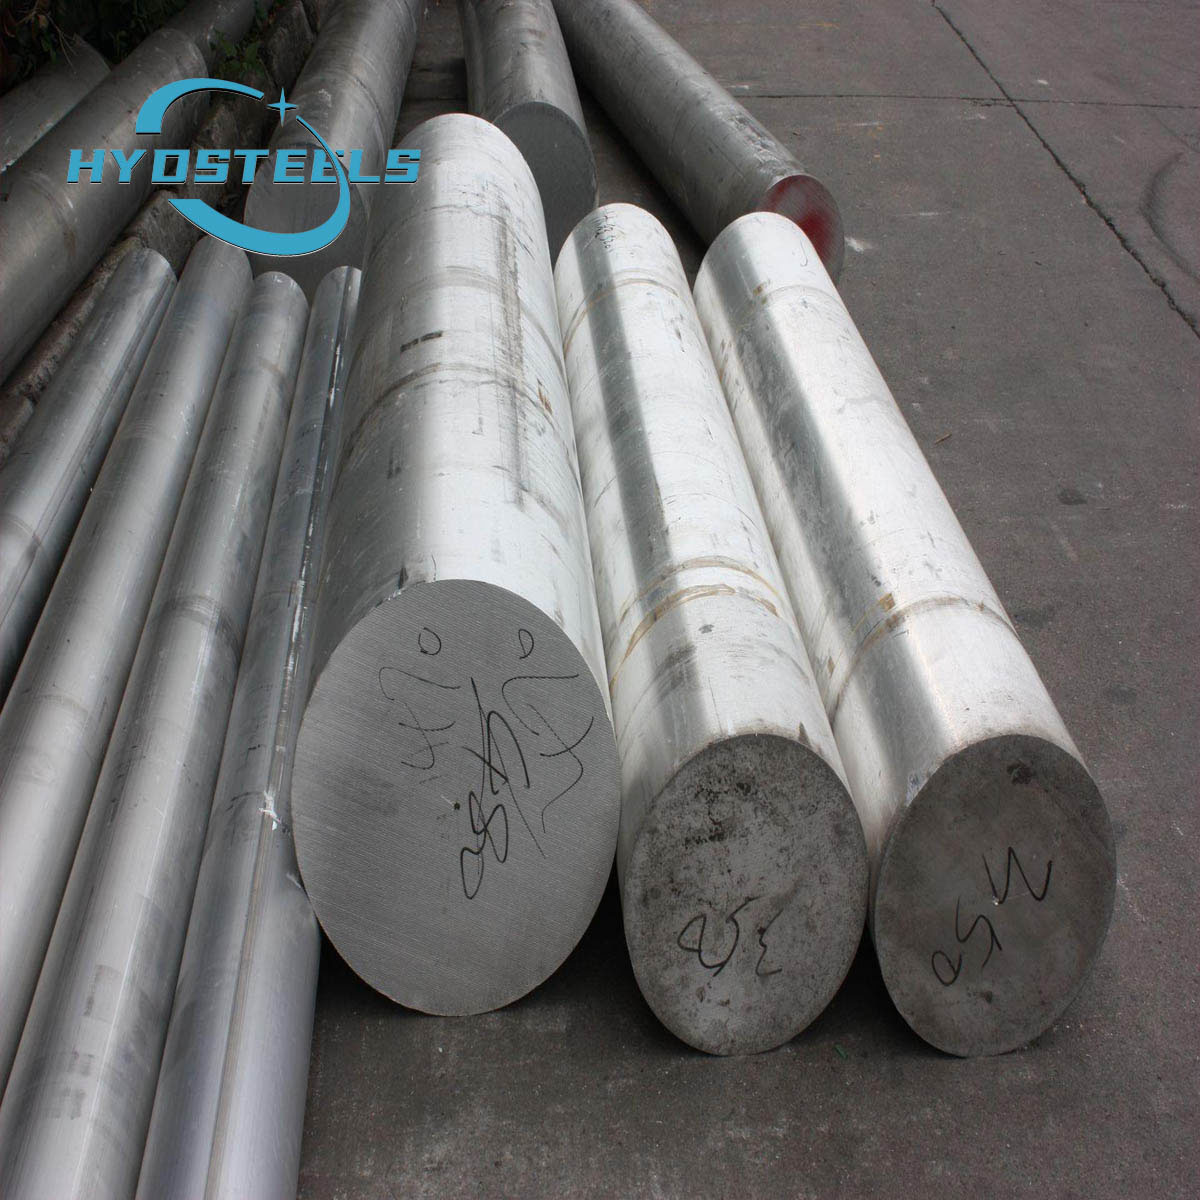  Professional Manufacturer Steel CK45 Hard Chrome Plated Piston Rod For Hydraulic Oil Cylinder